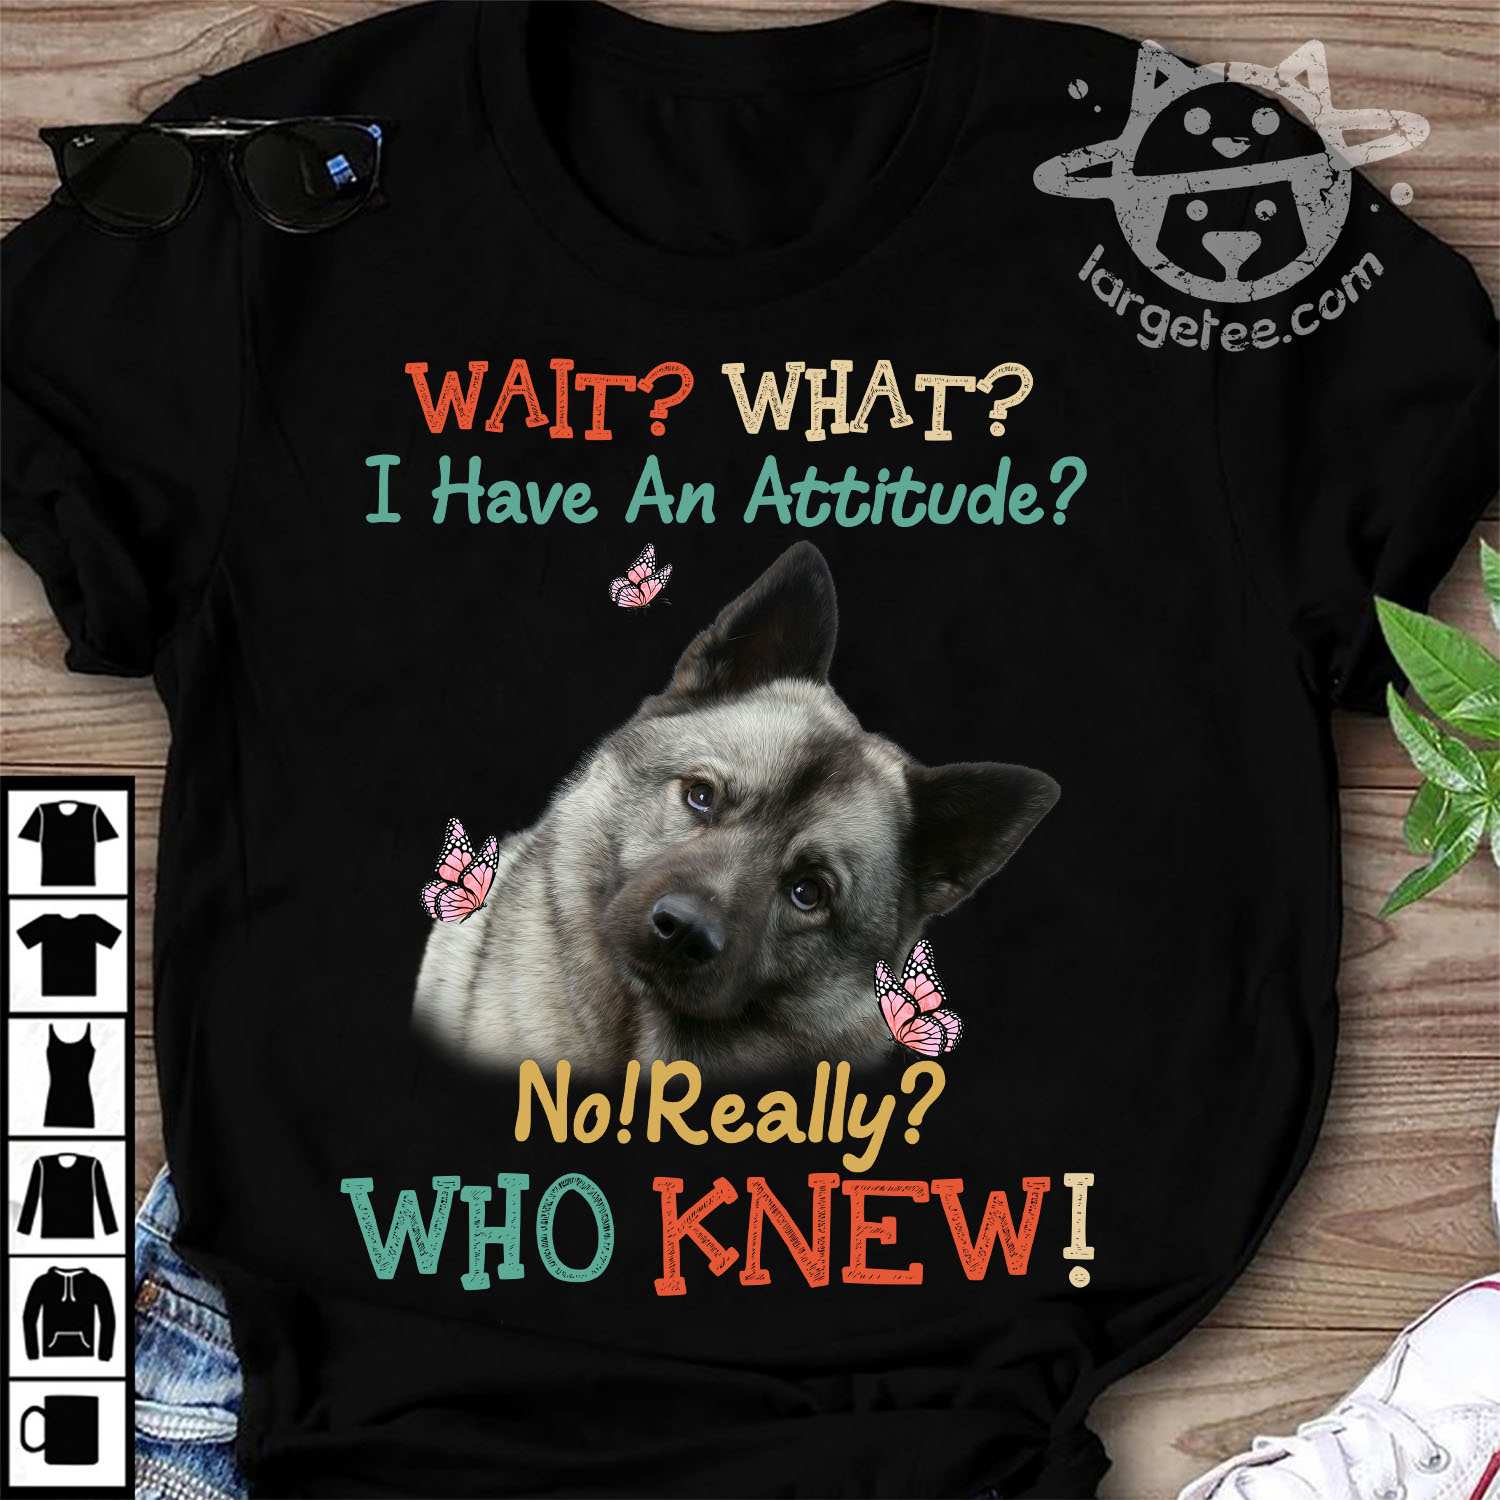 I have an attitude - Norwegian Elkhound Breed, dog lover T-shirt